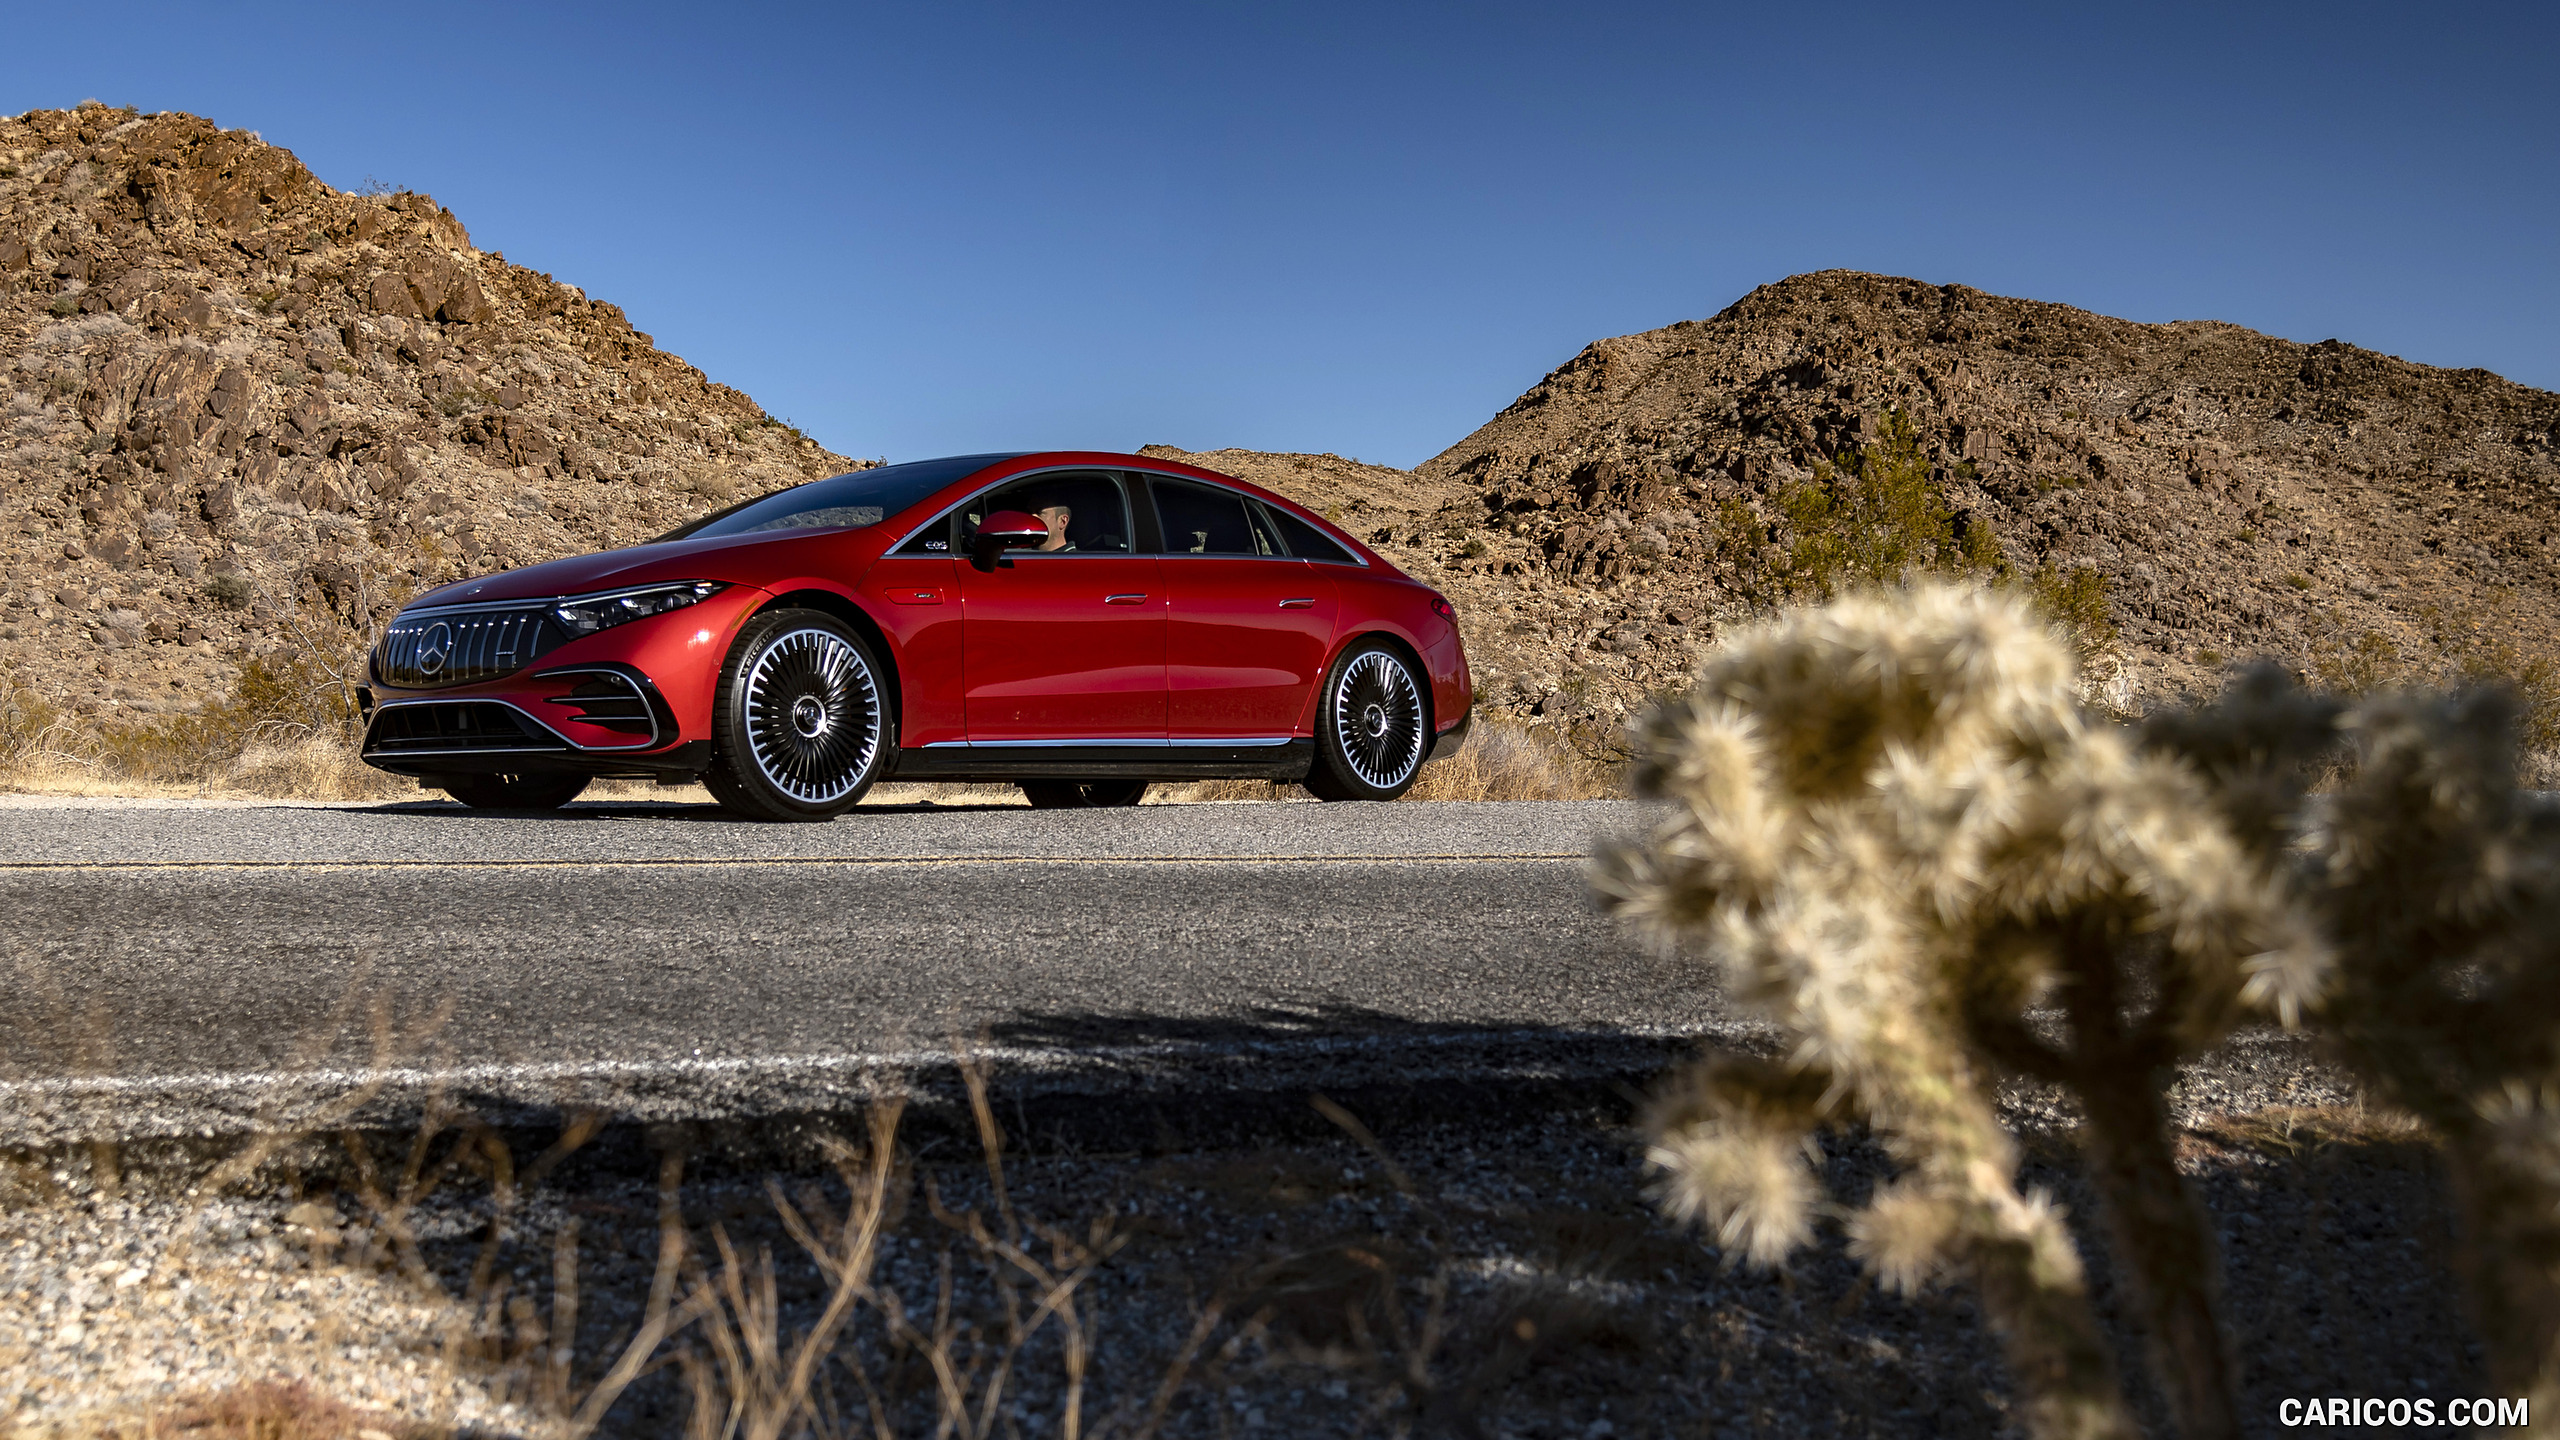 2022 Mercedes-AMG EQS 53 4MATIC+ (Color: Hyazinth Red Metallic) - Front Three-Quarter, #52 of 76